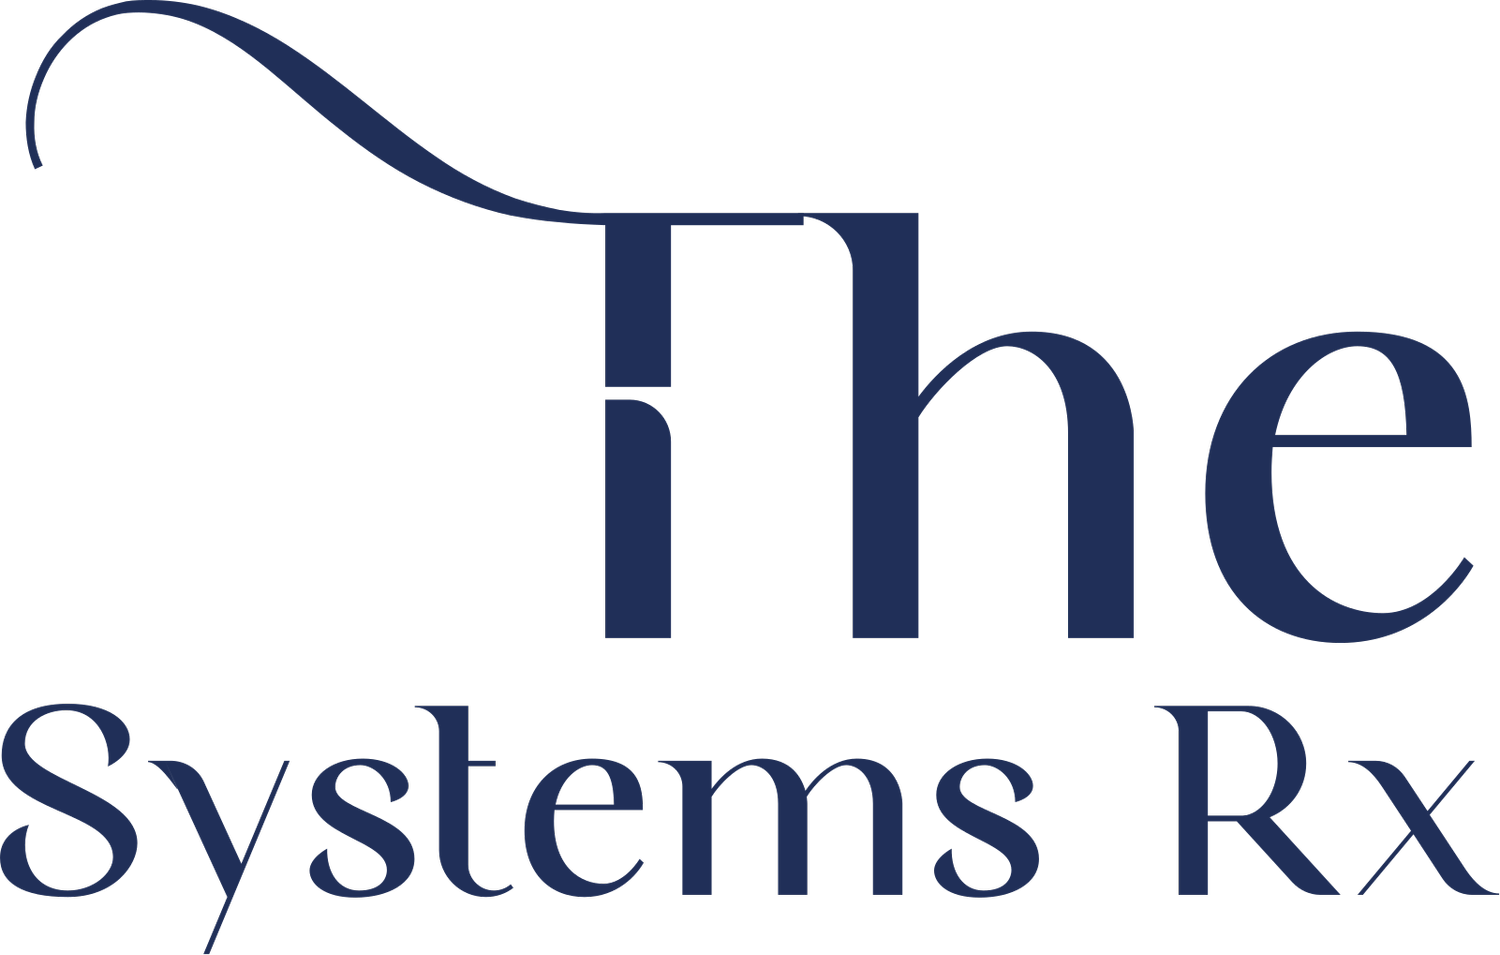 The Systems Rx